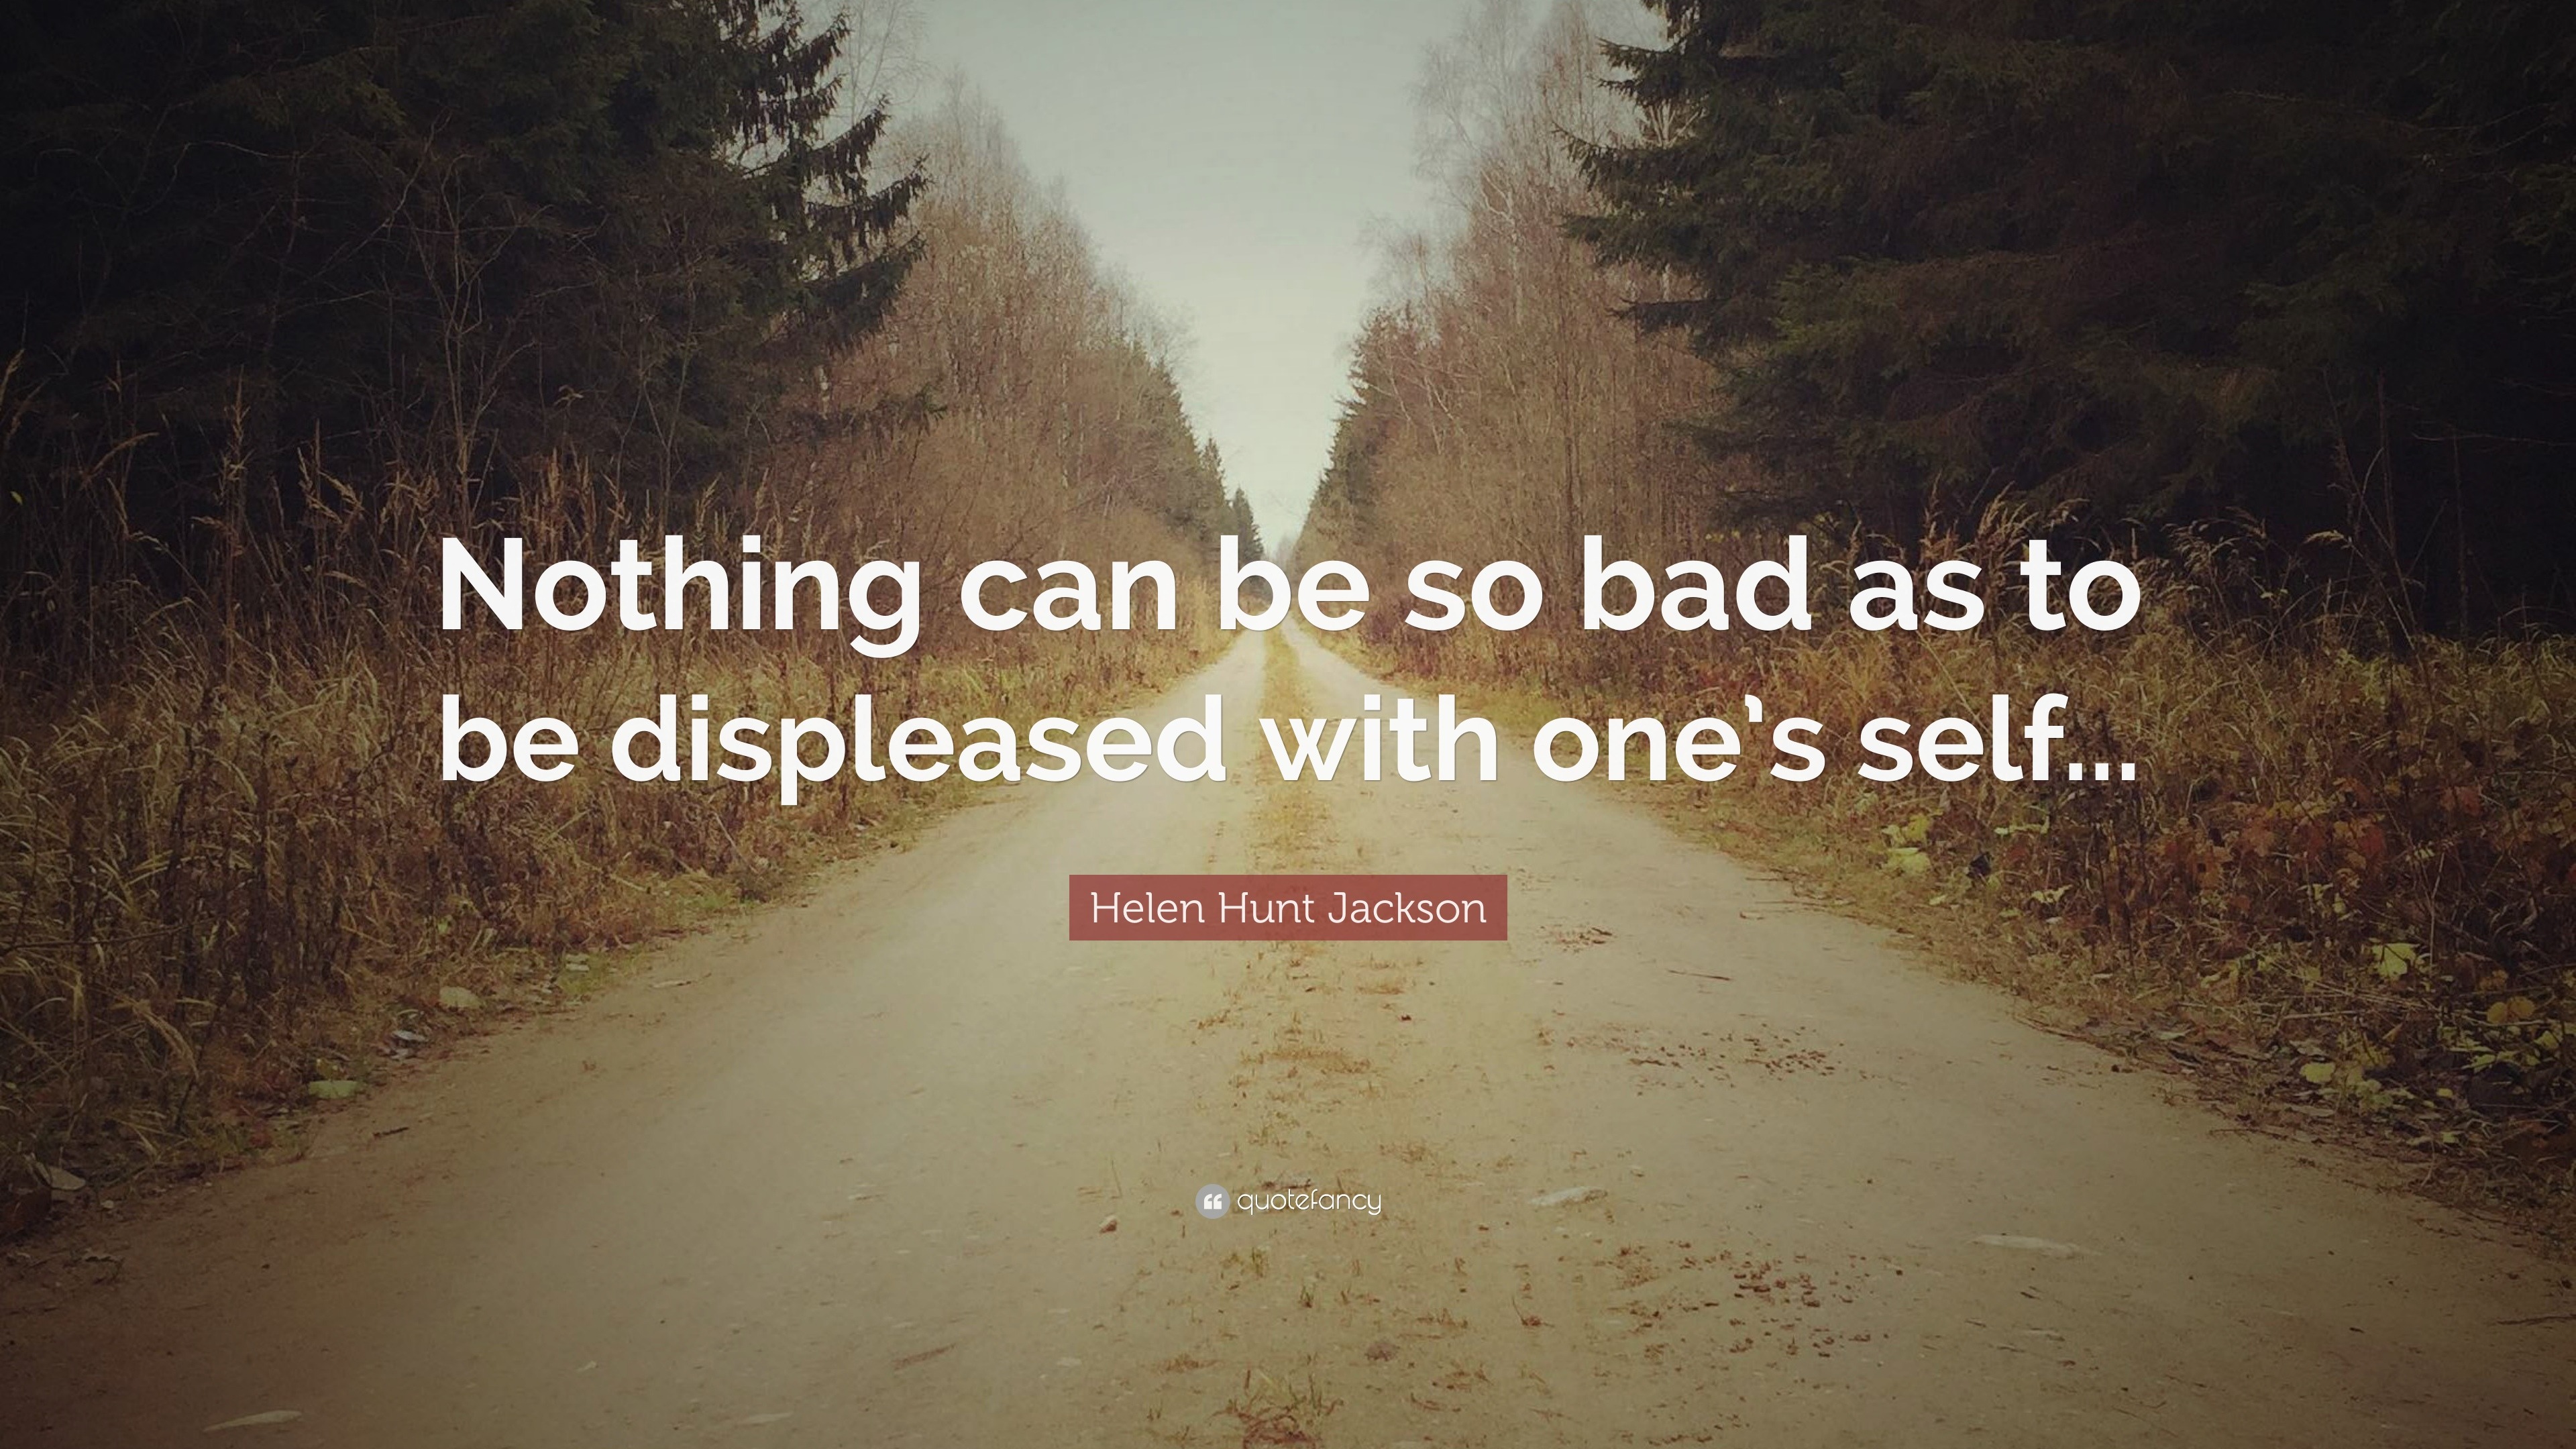 Helen Hunt Jackson Quote: “Nothing can be so bad as to be displeased ...